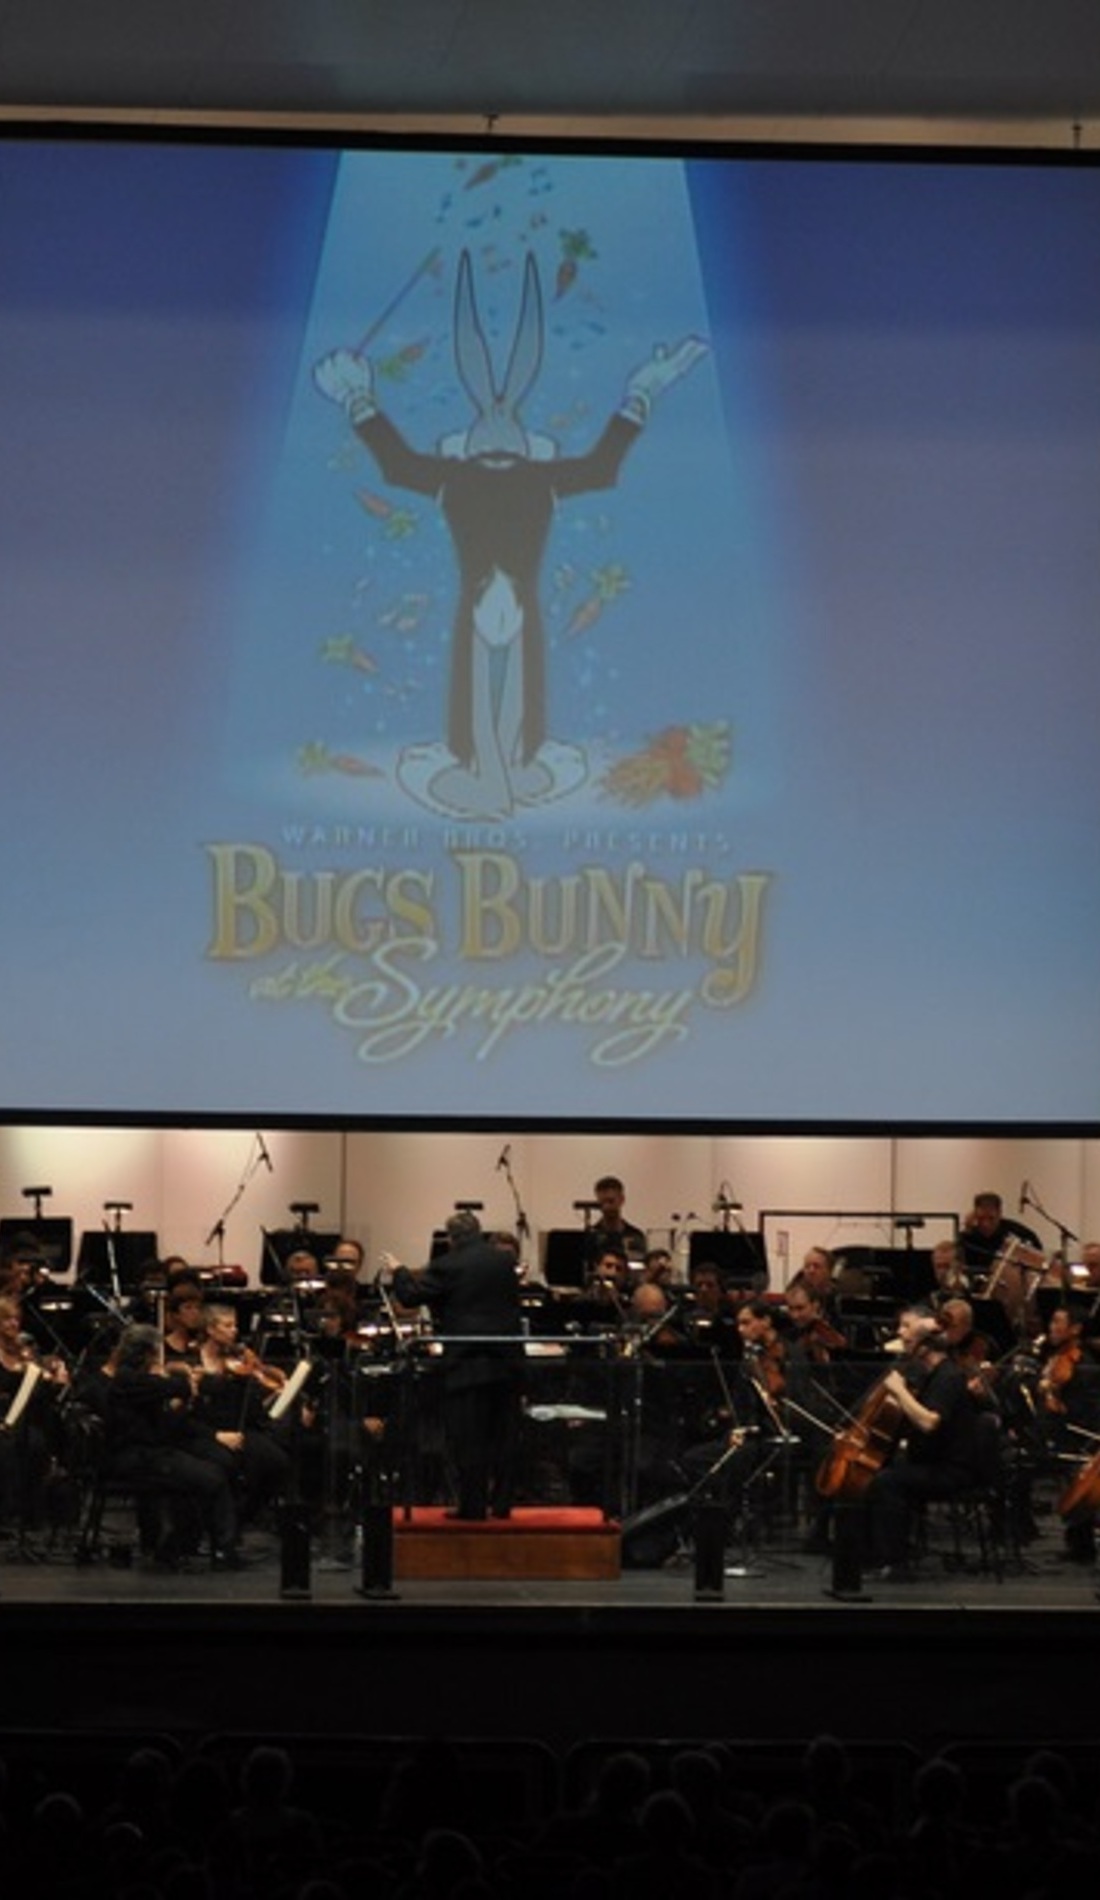 A Bugs Bunny at the Symphony live event